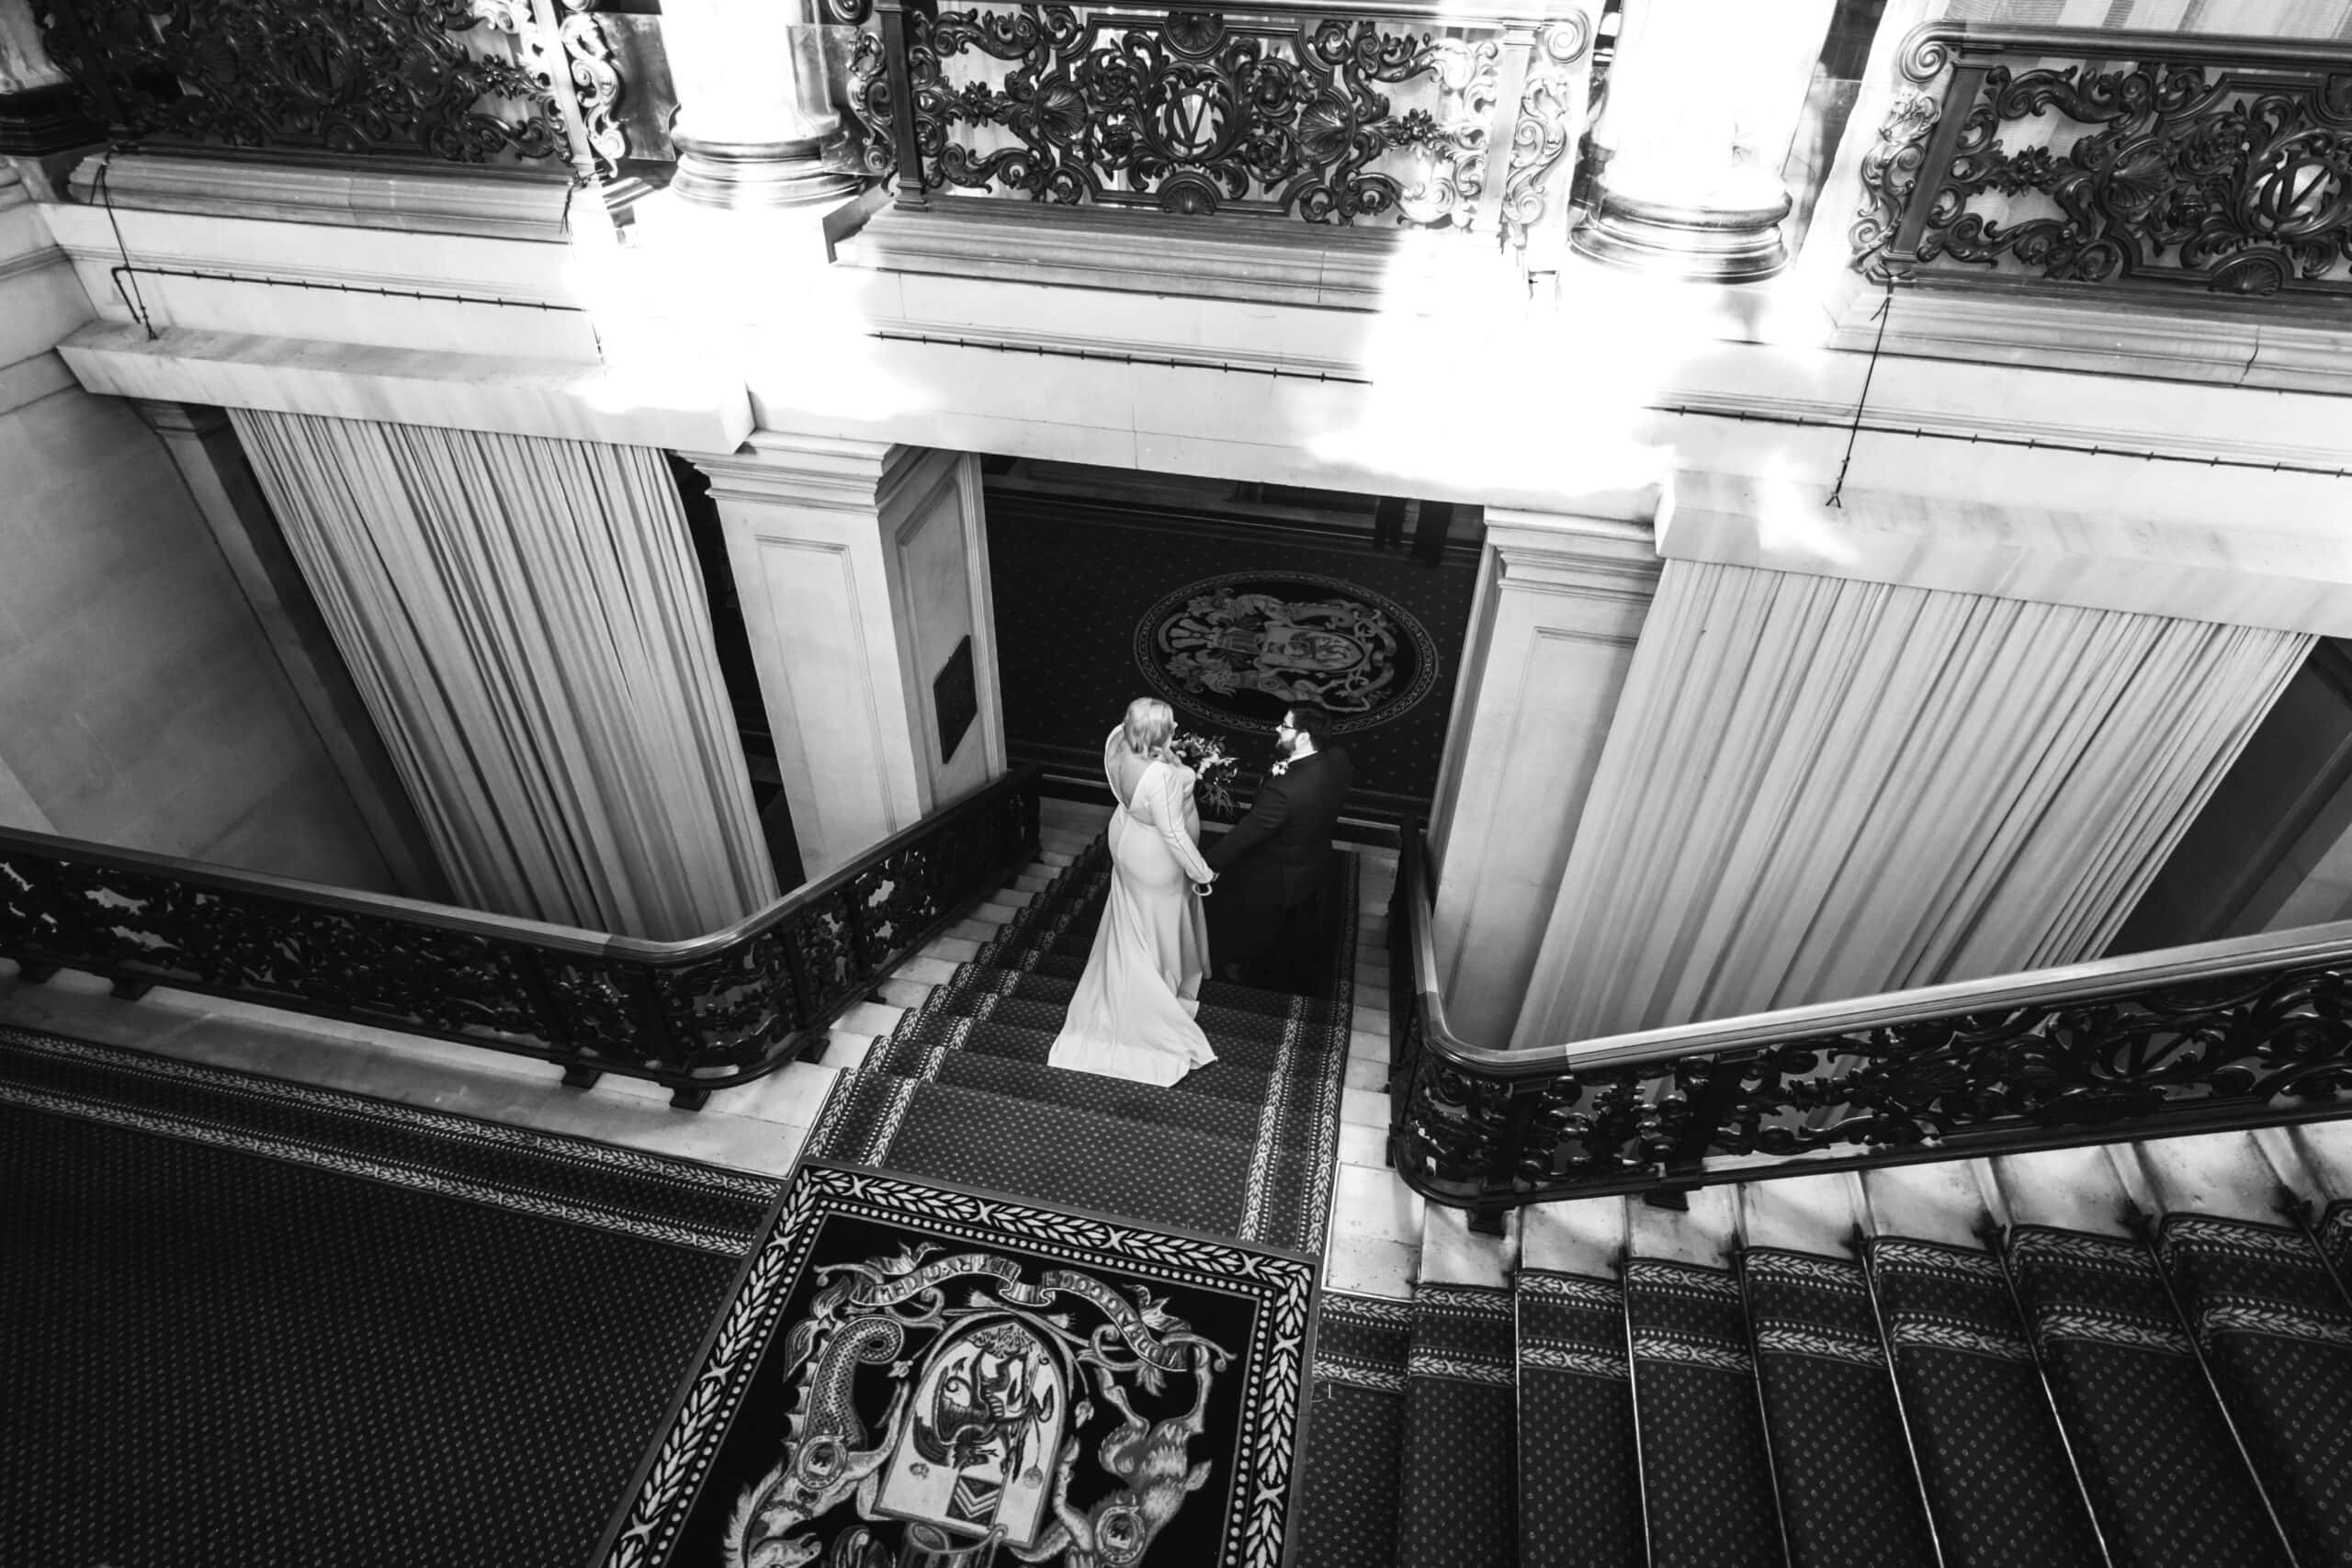 A bride and groom hold hands in a majestic stairwell, surrounded by elegant marble columns and intricate iron railings, with sunlight streaming through large windows onto the ornate floor.